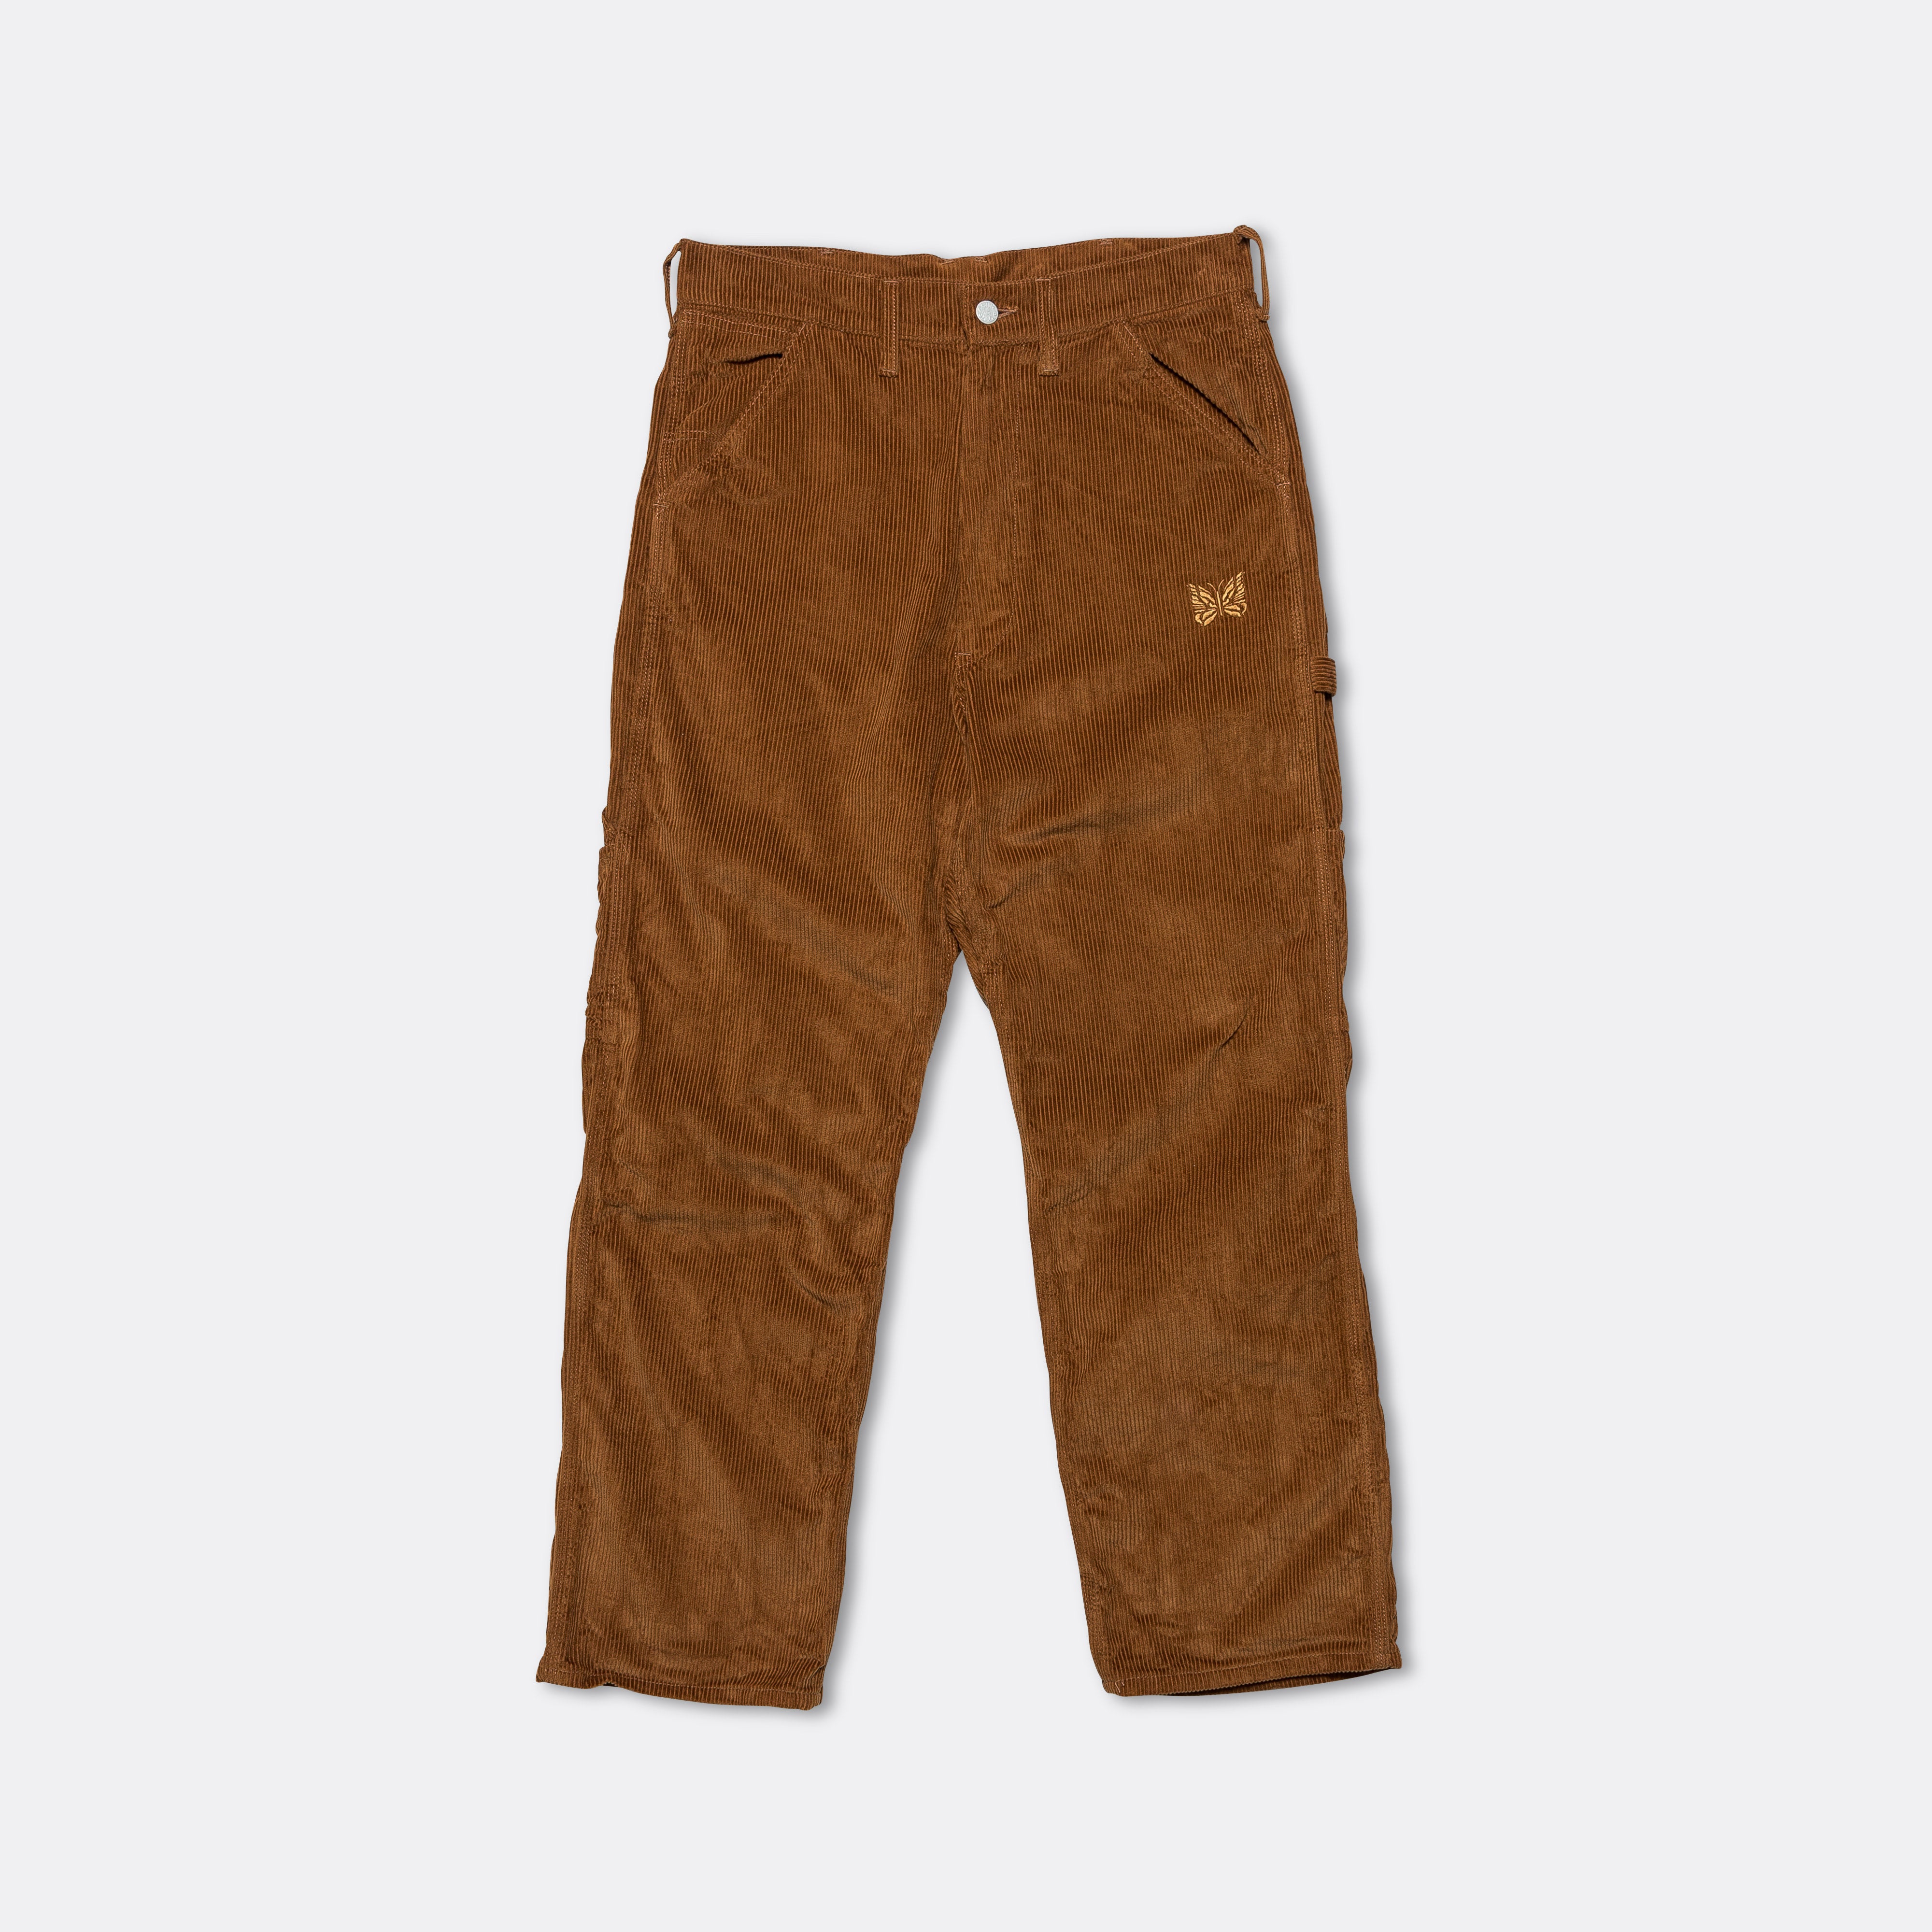 Needles x SMITH's Painter Pants - Brown 8W Corduroy | Up There